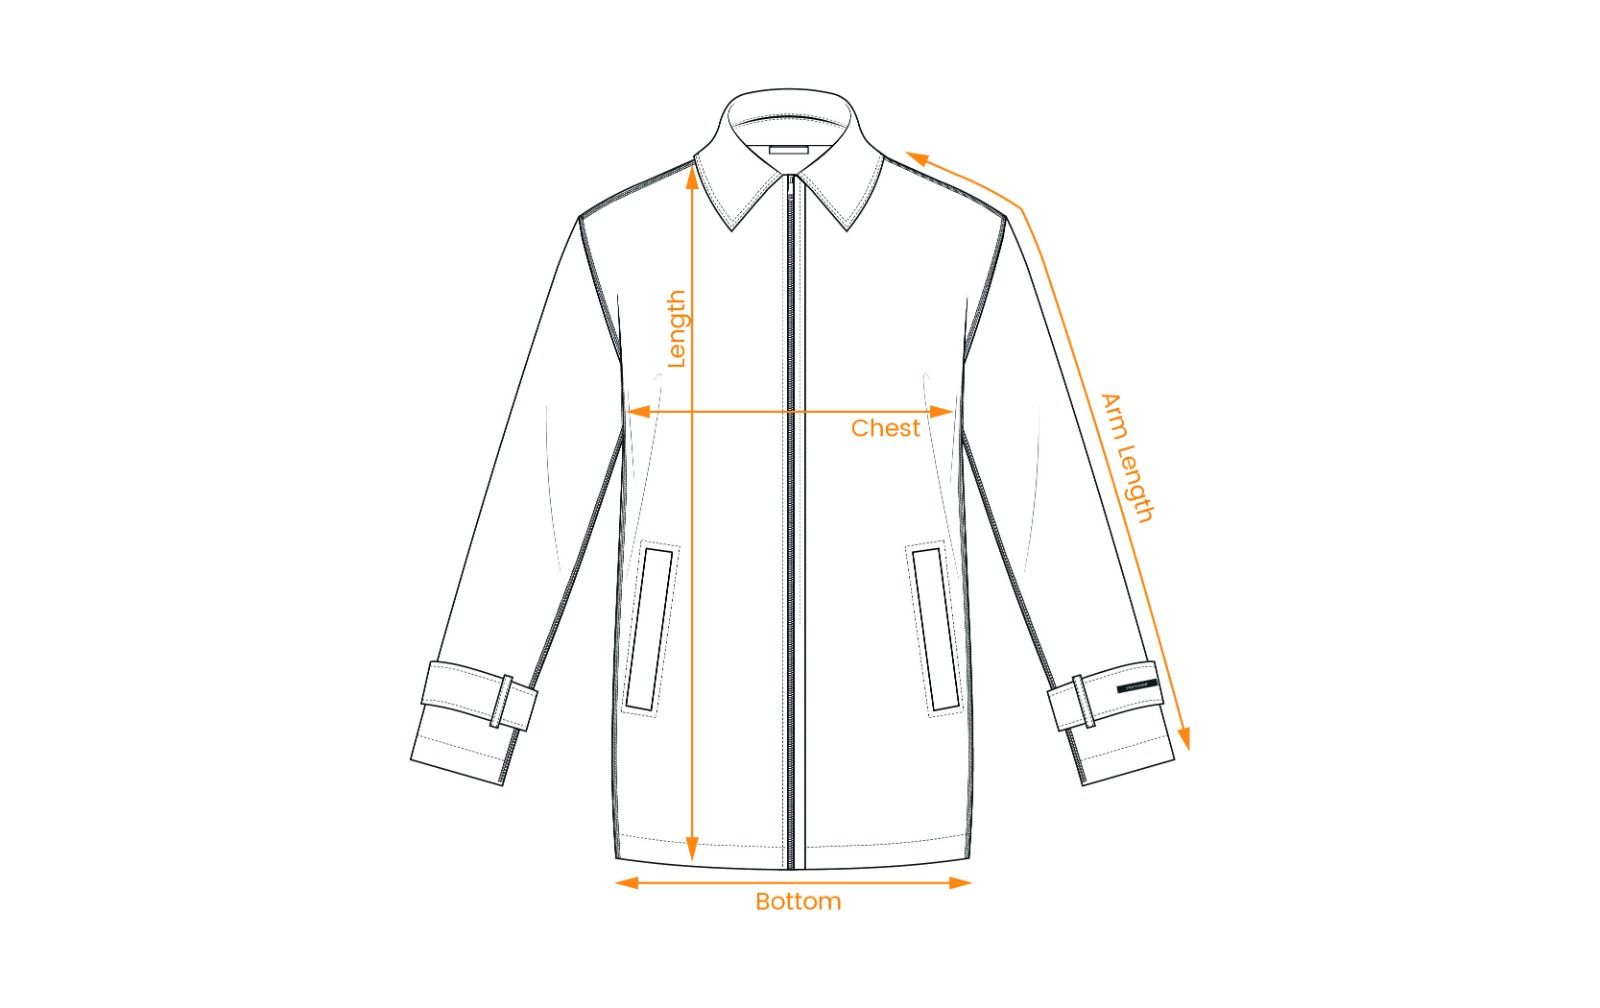 The Inside-Out Woven Jacket | c'est normal - Around here.